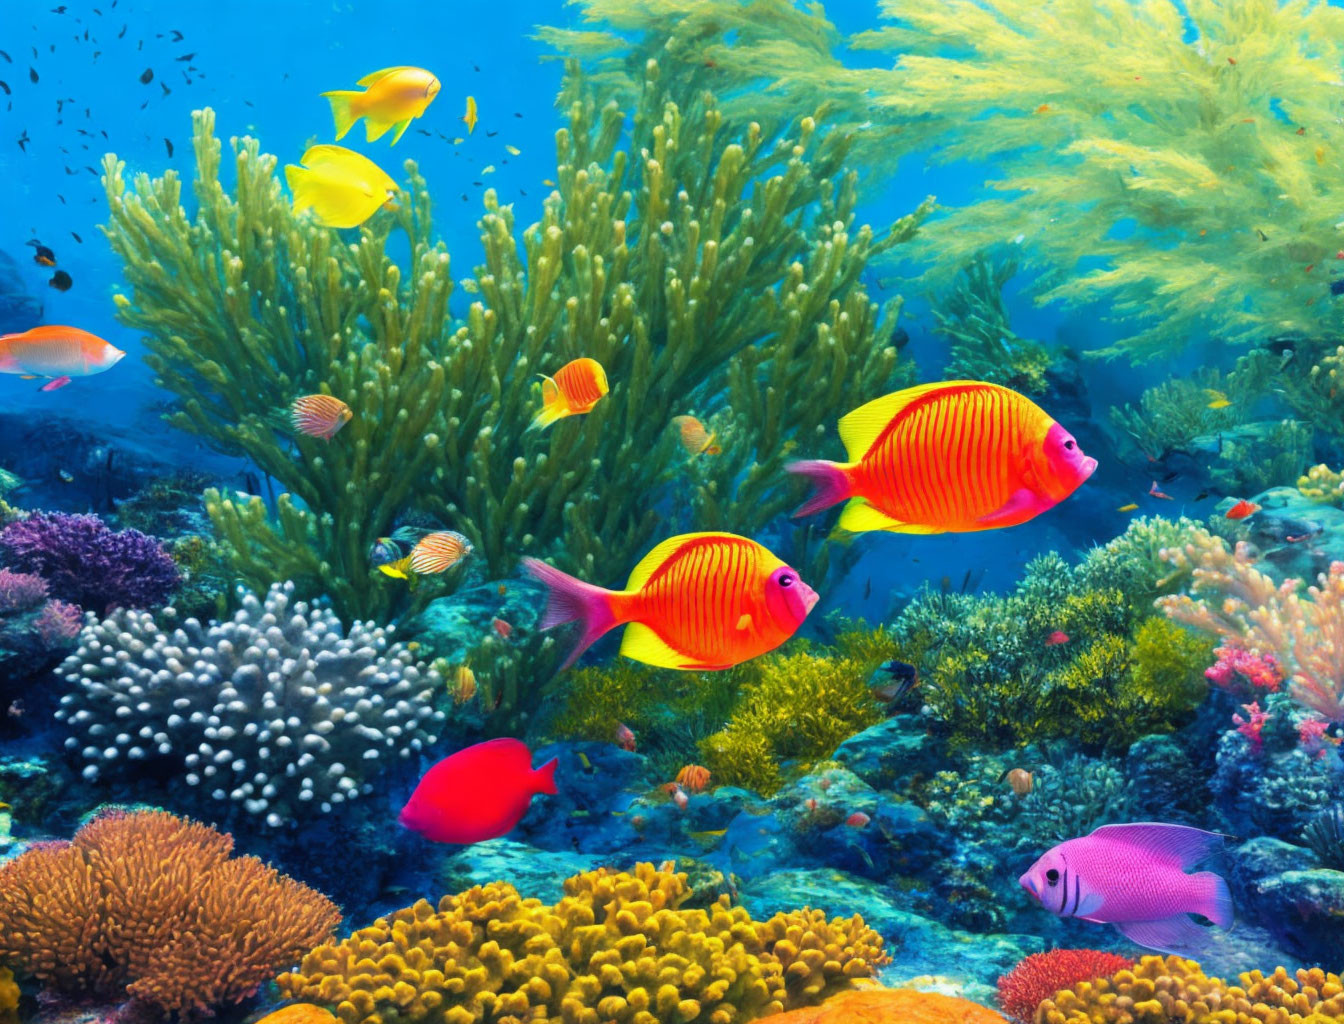 Vibrant tropical fish and corals in clear blue underwater scene